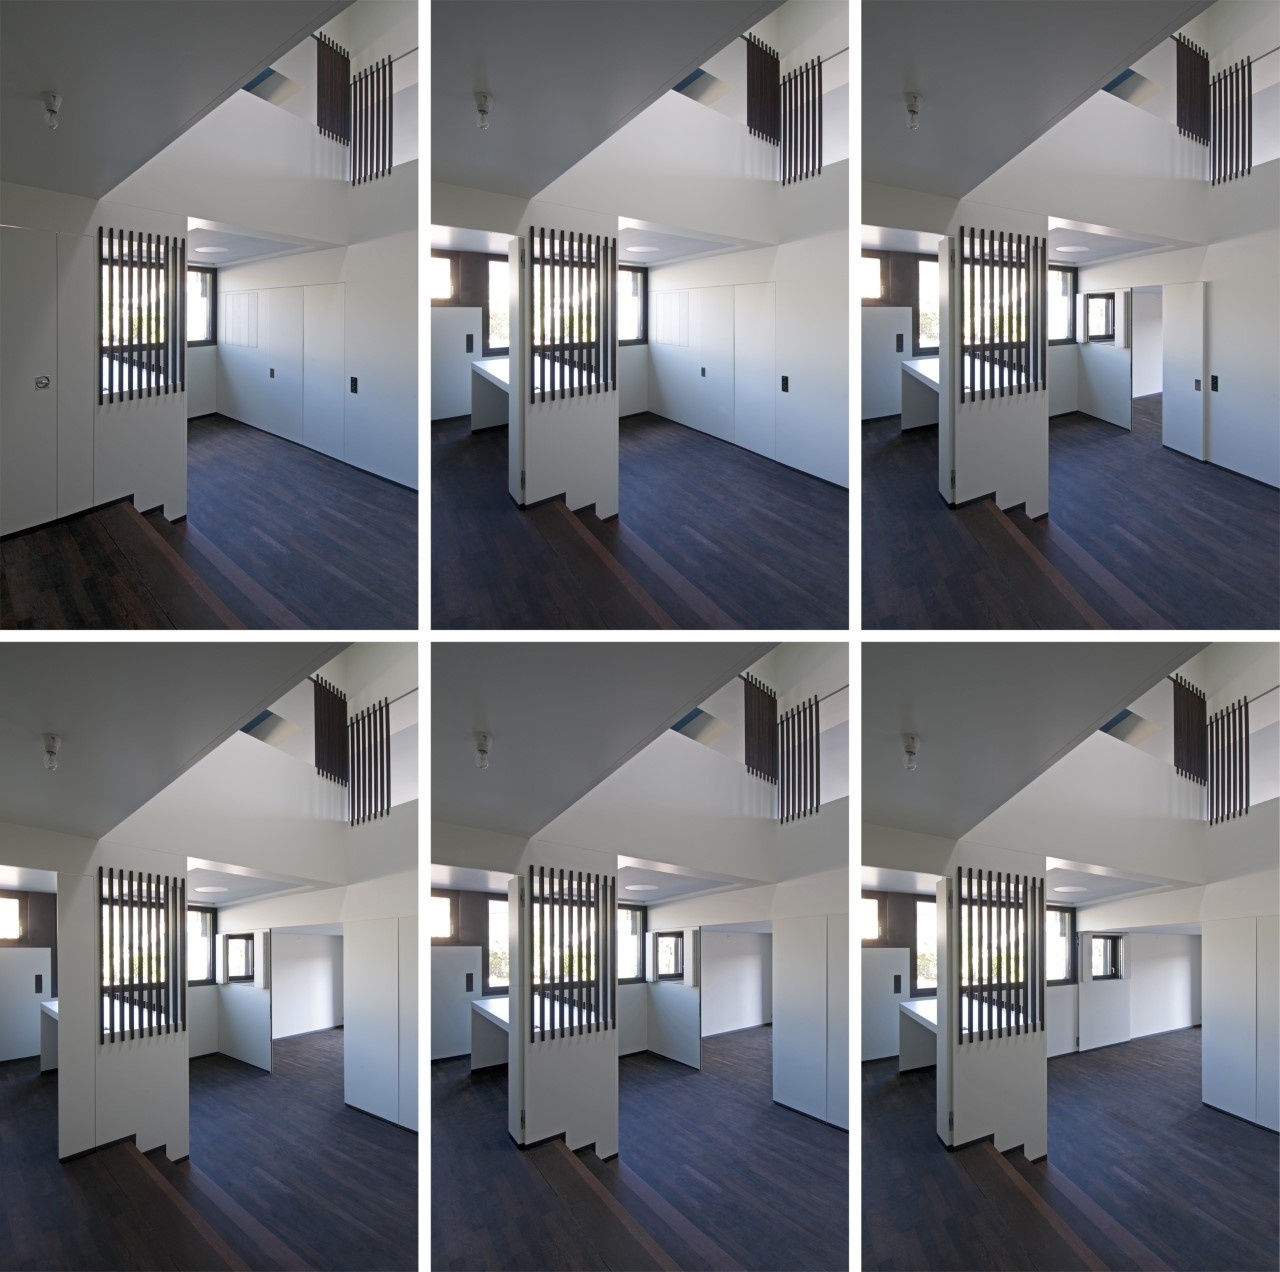 Six views of an interior residential space demonstrating door and wall panels being opened and folded back. 